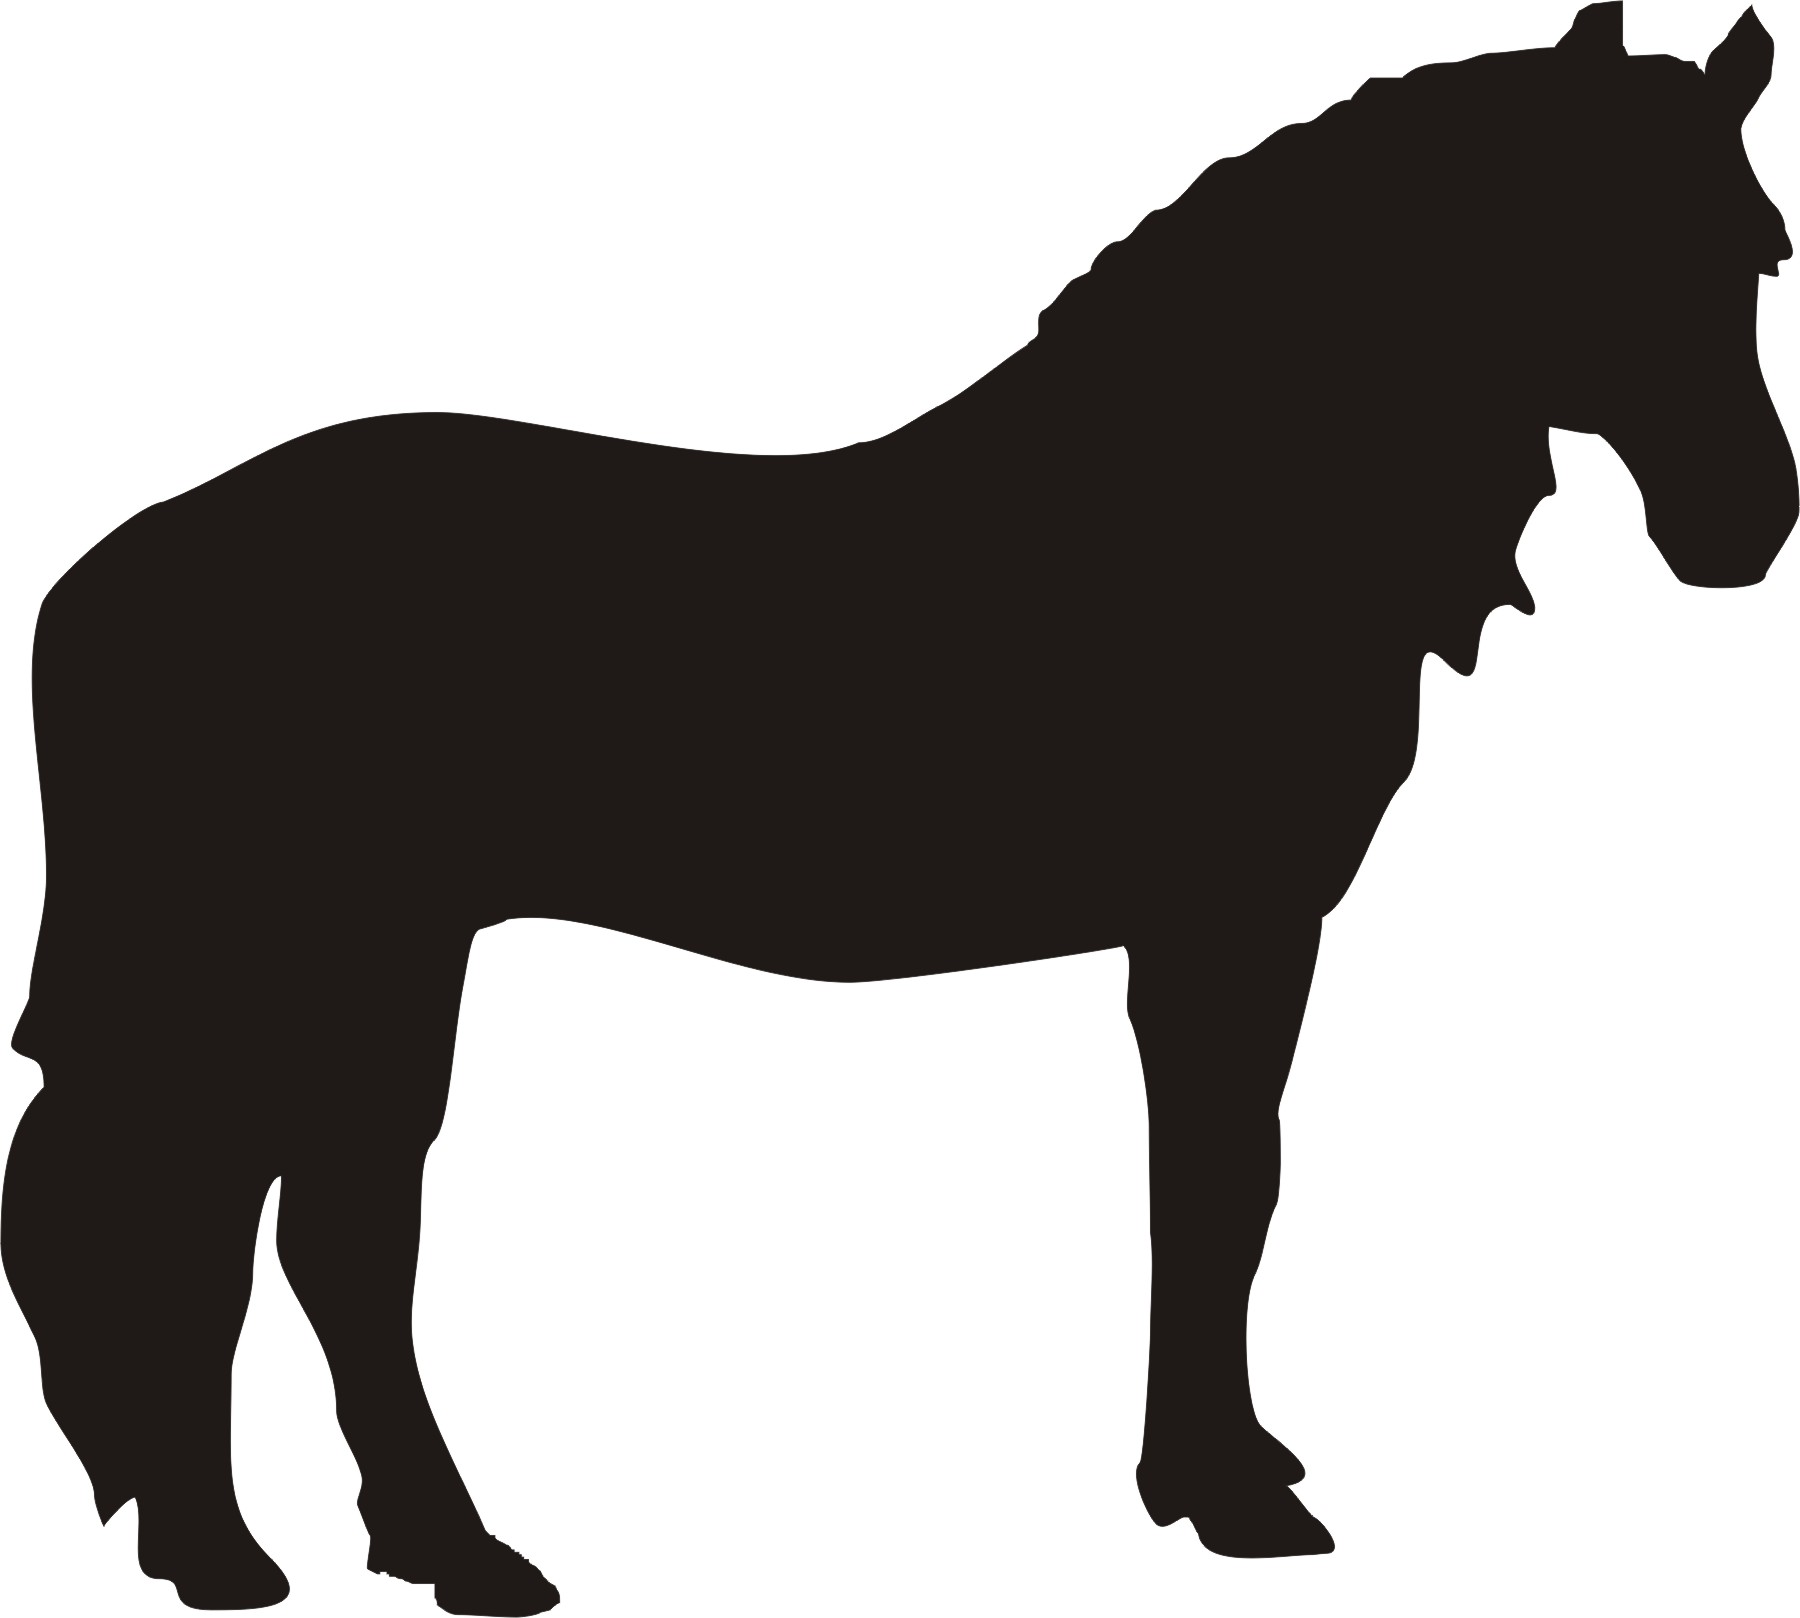 17 horse head silhouette free | Clipart Panda - Free Clipart Images